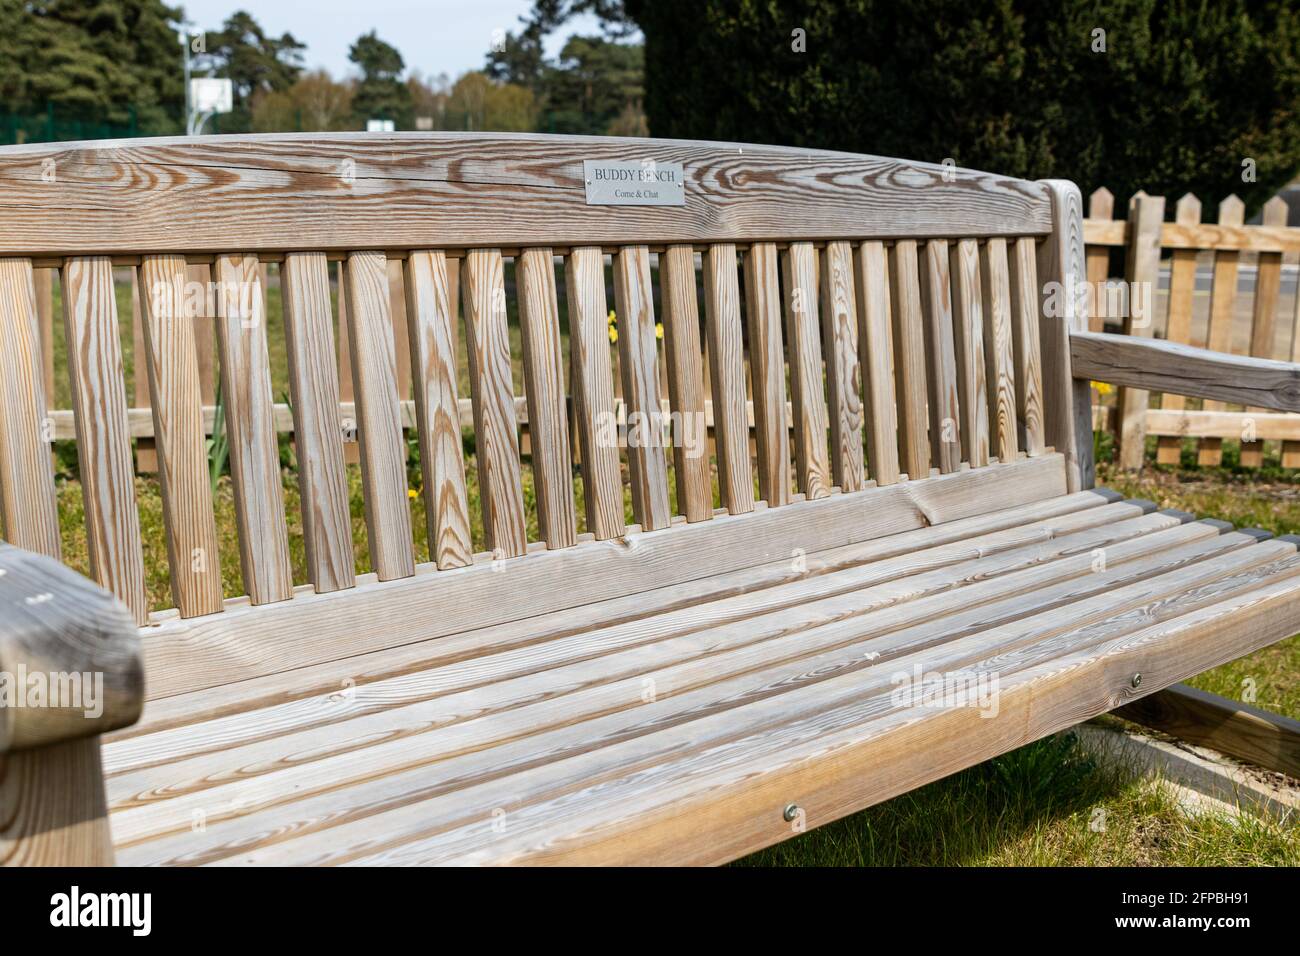 A buddy bench where friends or strangers can sit for a conversation and companionship. Friendship, loneliness, mental health concept Stock Photo